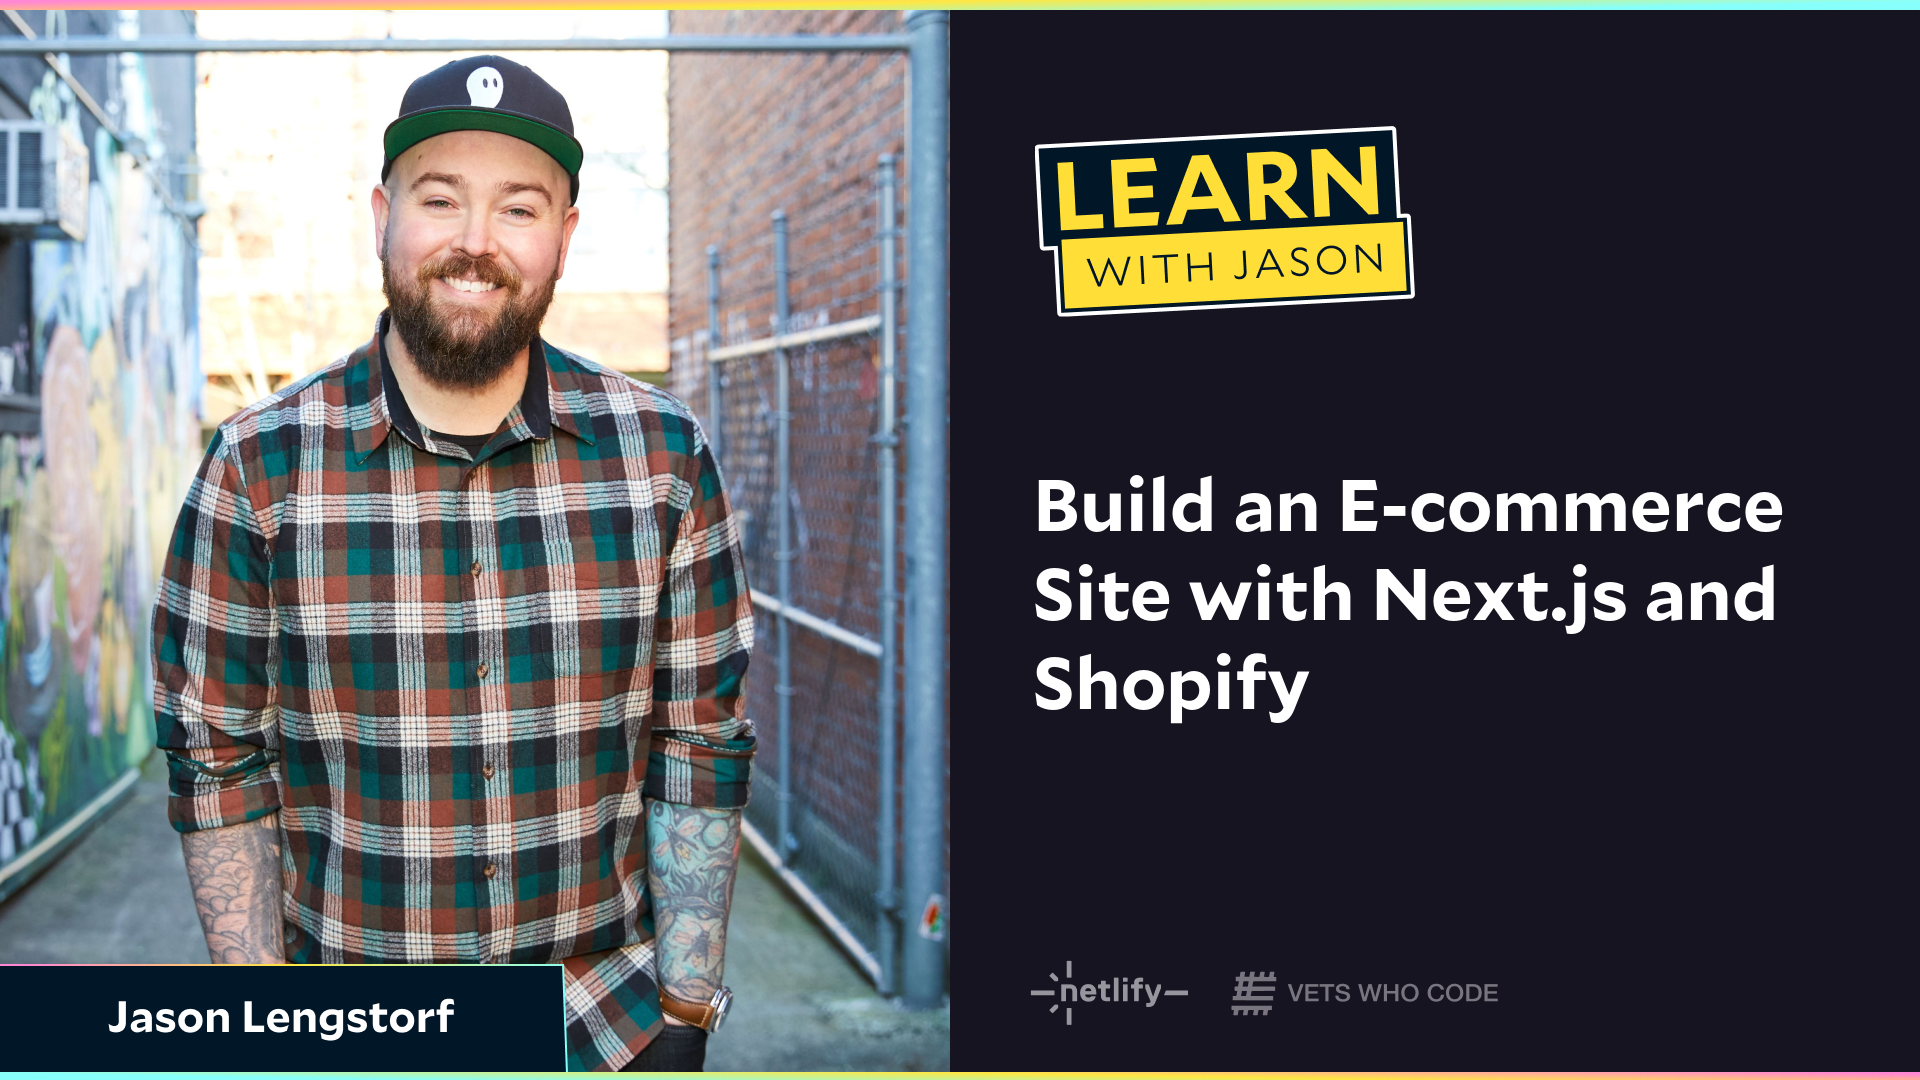 Build an E-commerce Site with Next.js and Shopify (with Jason Lengstorf)